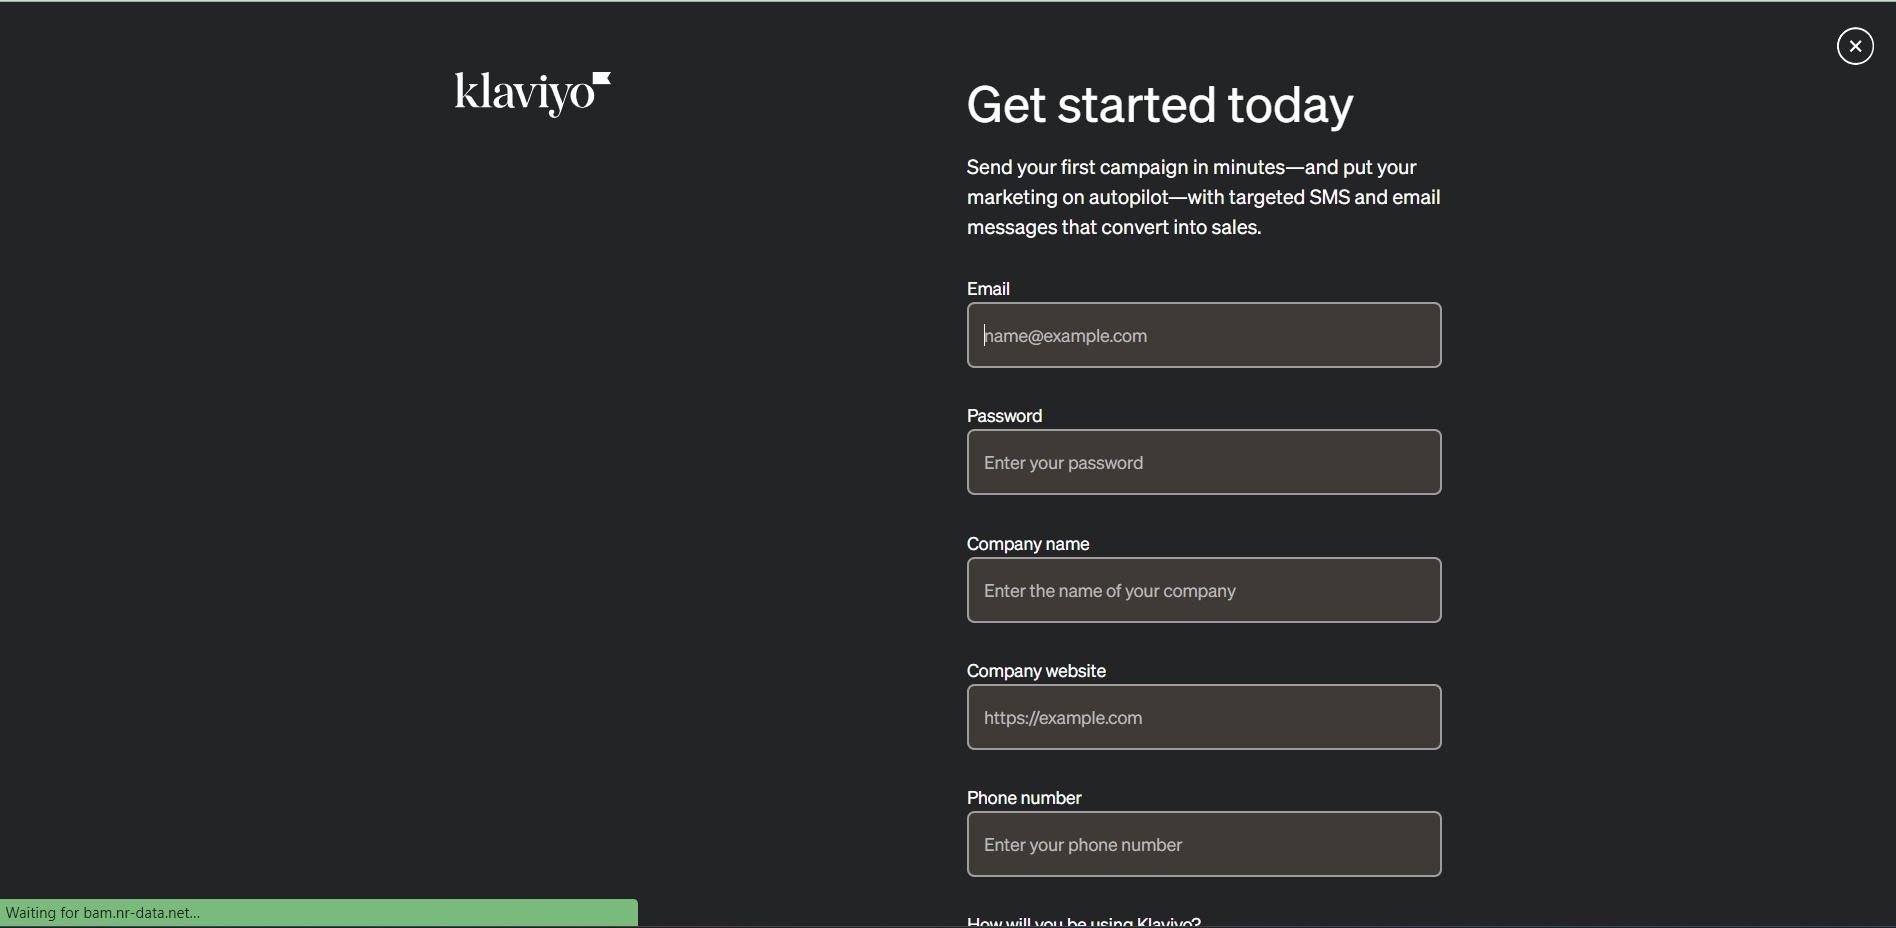 An example of an email sign up form from Klaviyo